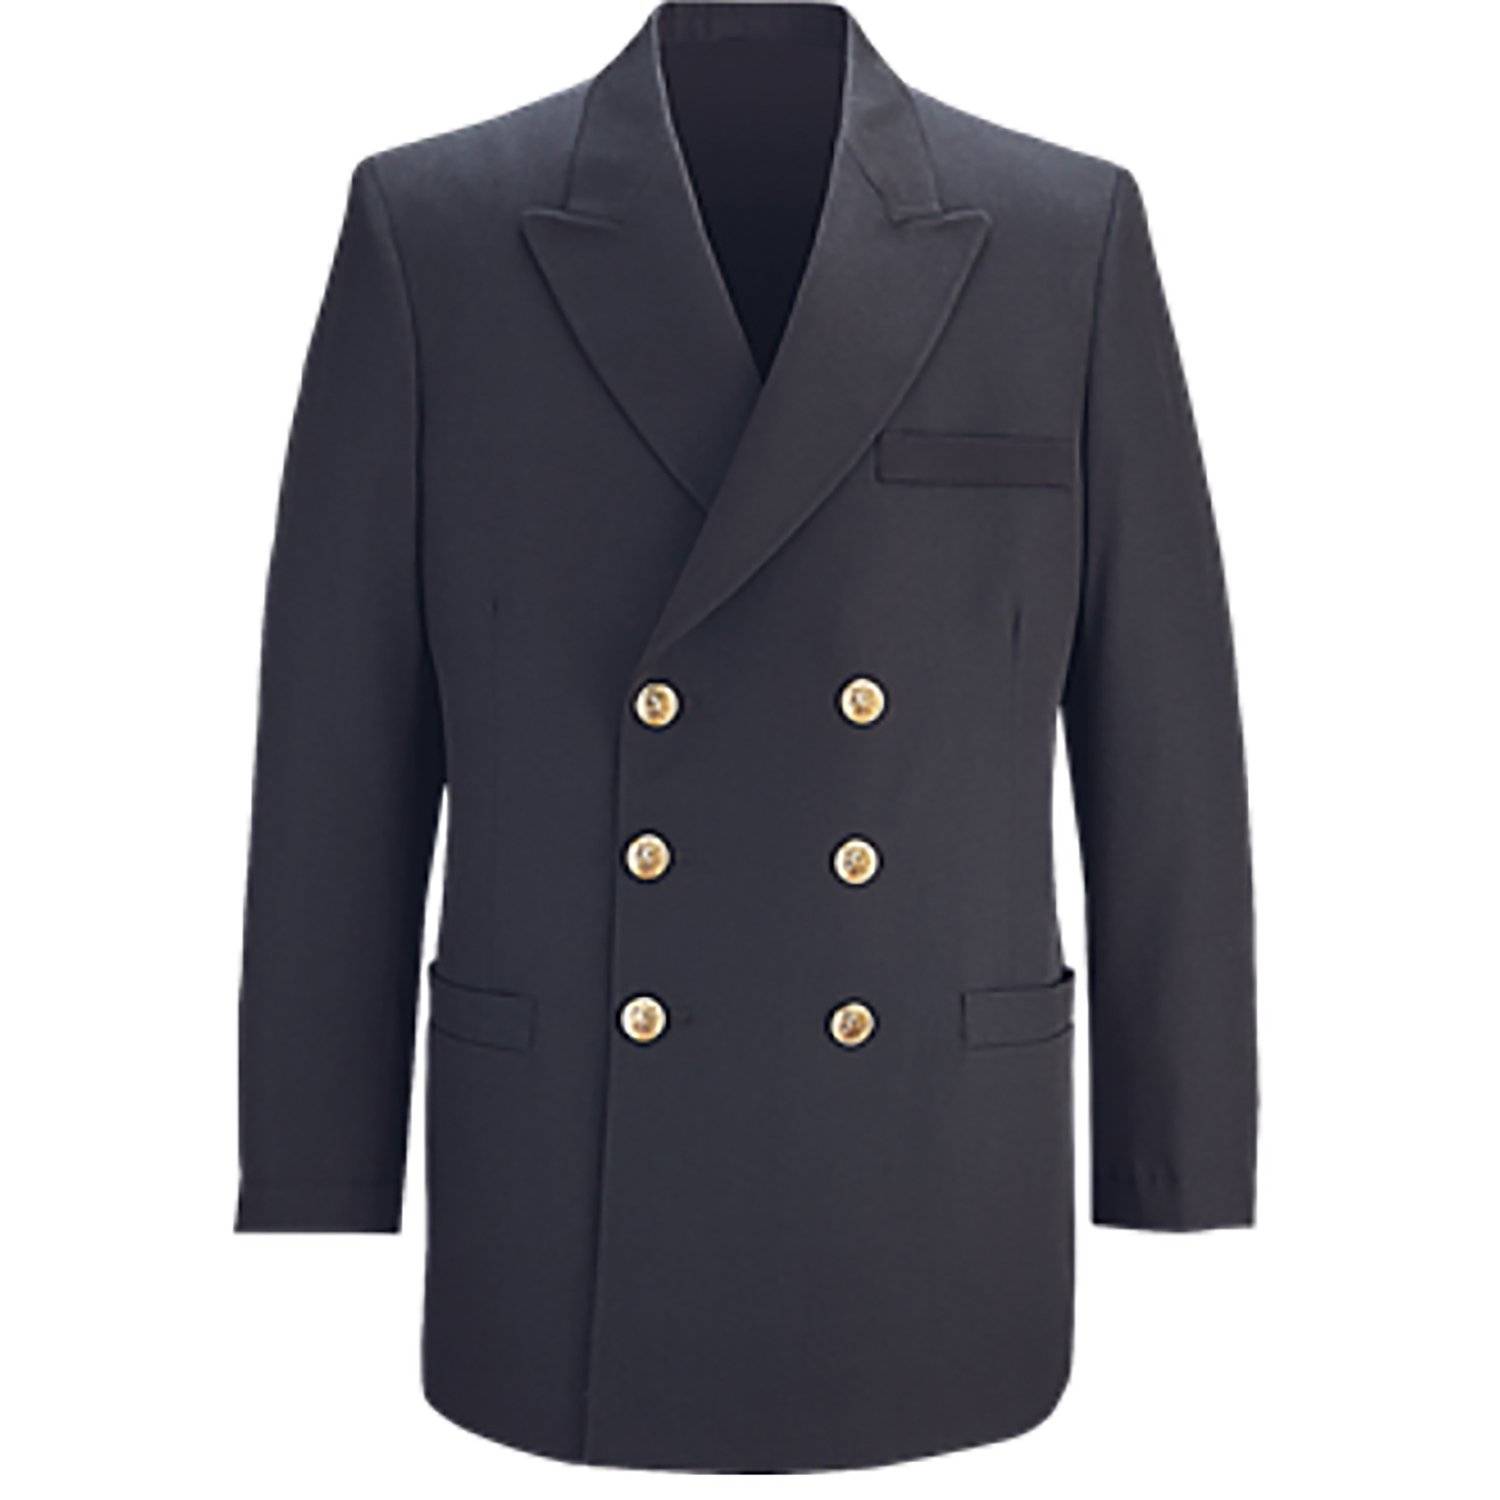 FLYING CROSS MENS USN SERVICE DRESS COAT WITH GOLD BUTTONS